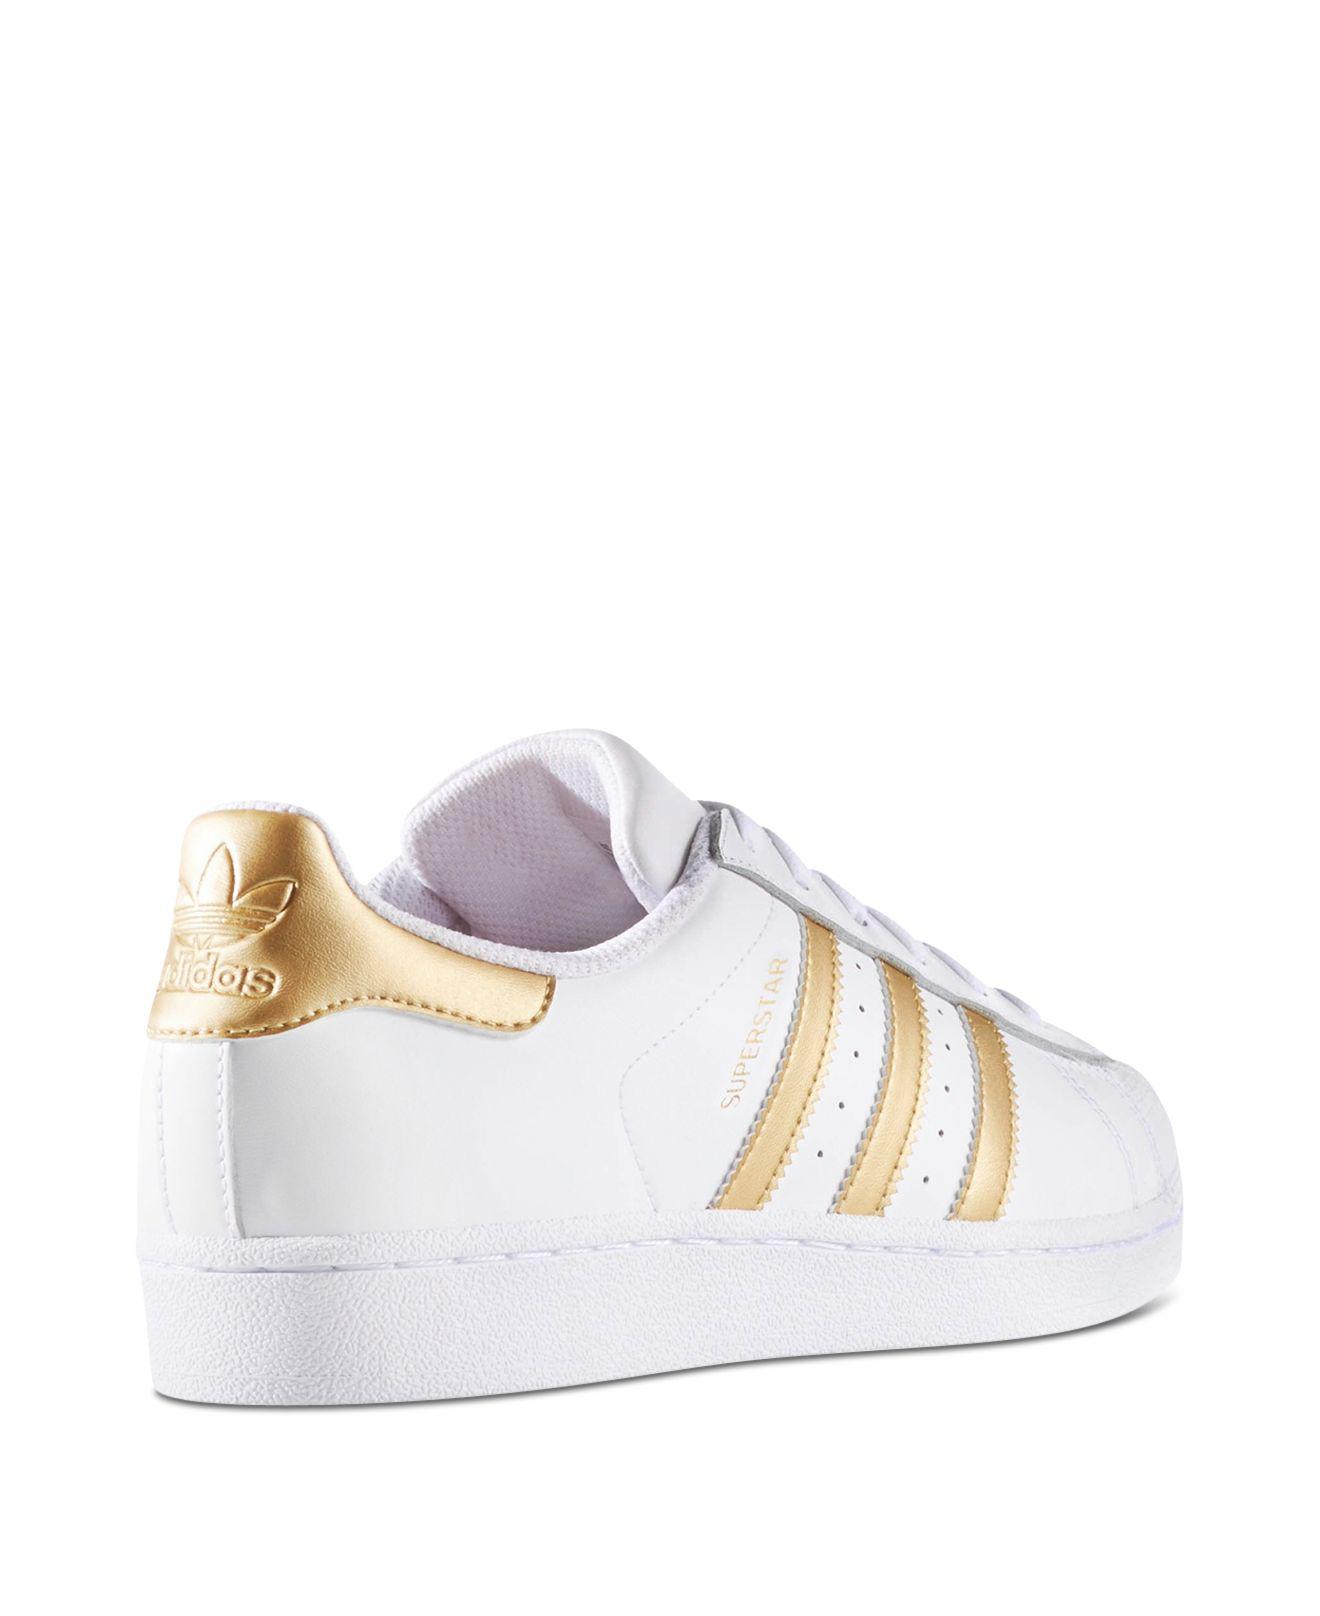 adidas Rubber Women's Superstar Lace Up Sneakers in White/Silver (White ...